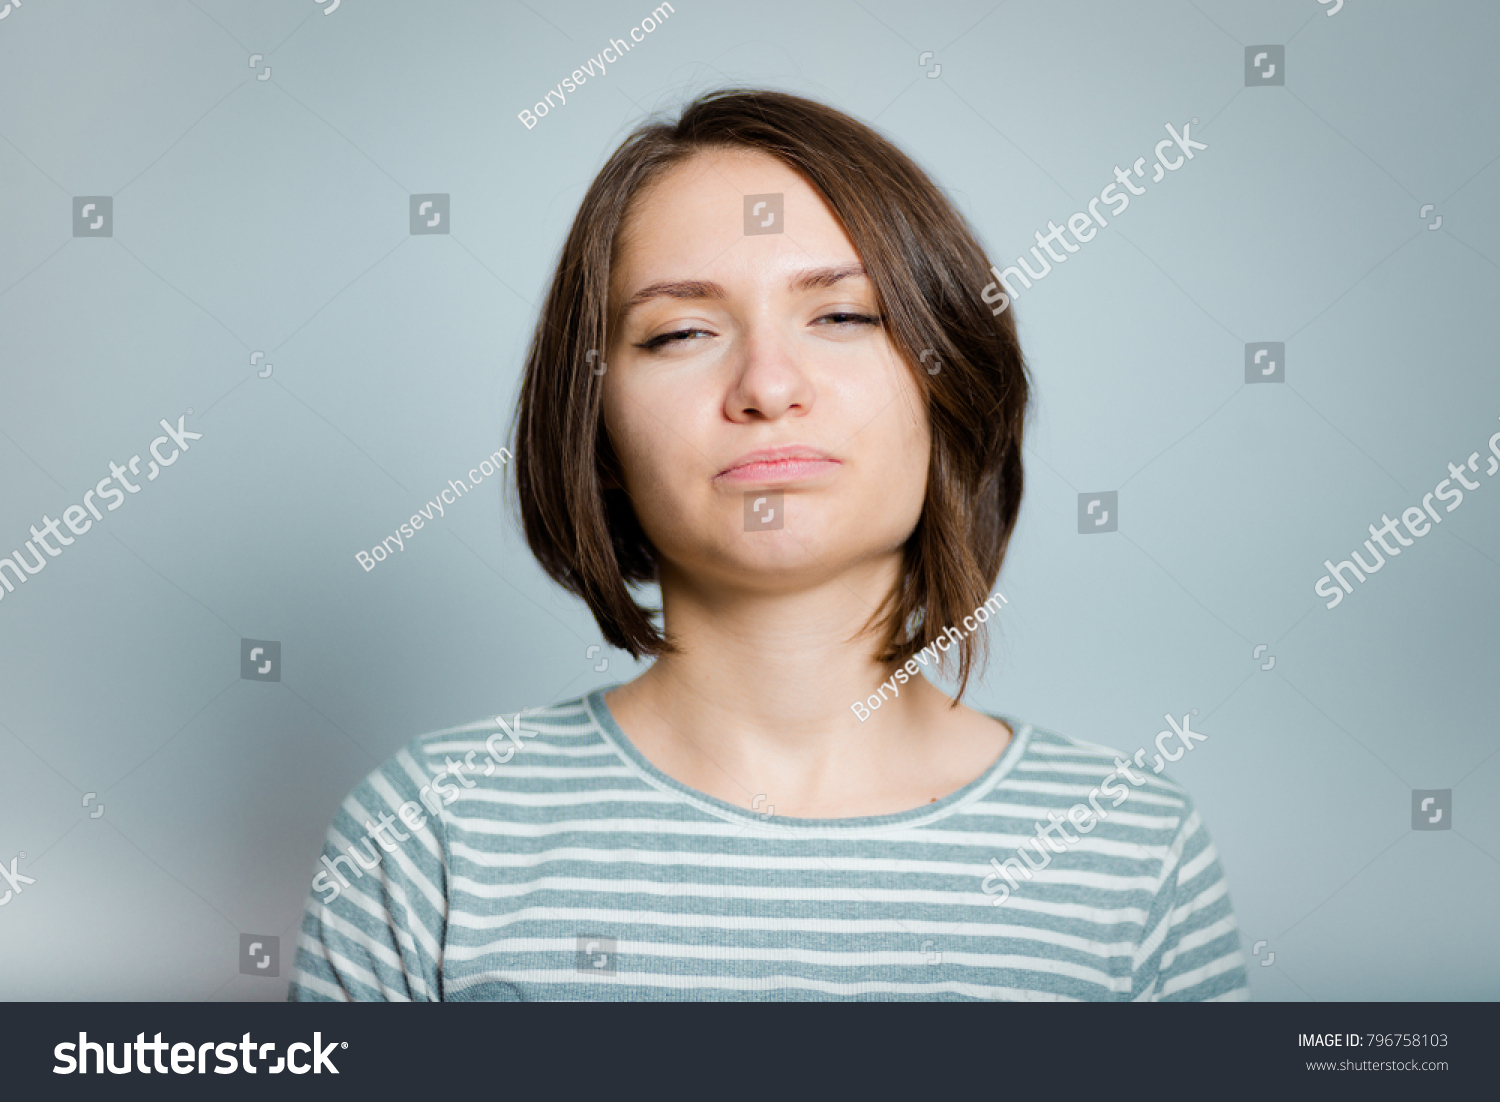 Beautiful Young Woman Looking Contempt Isolated Stock Photo 796758103 ...